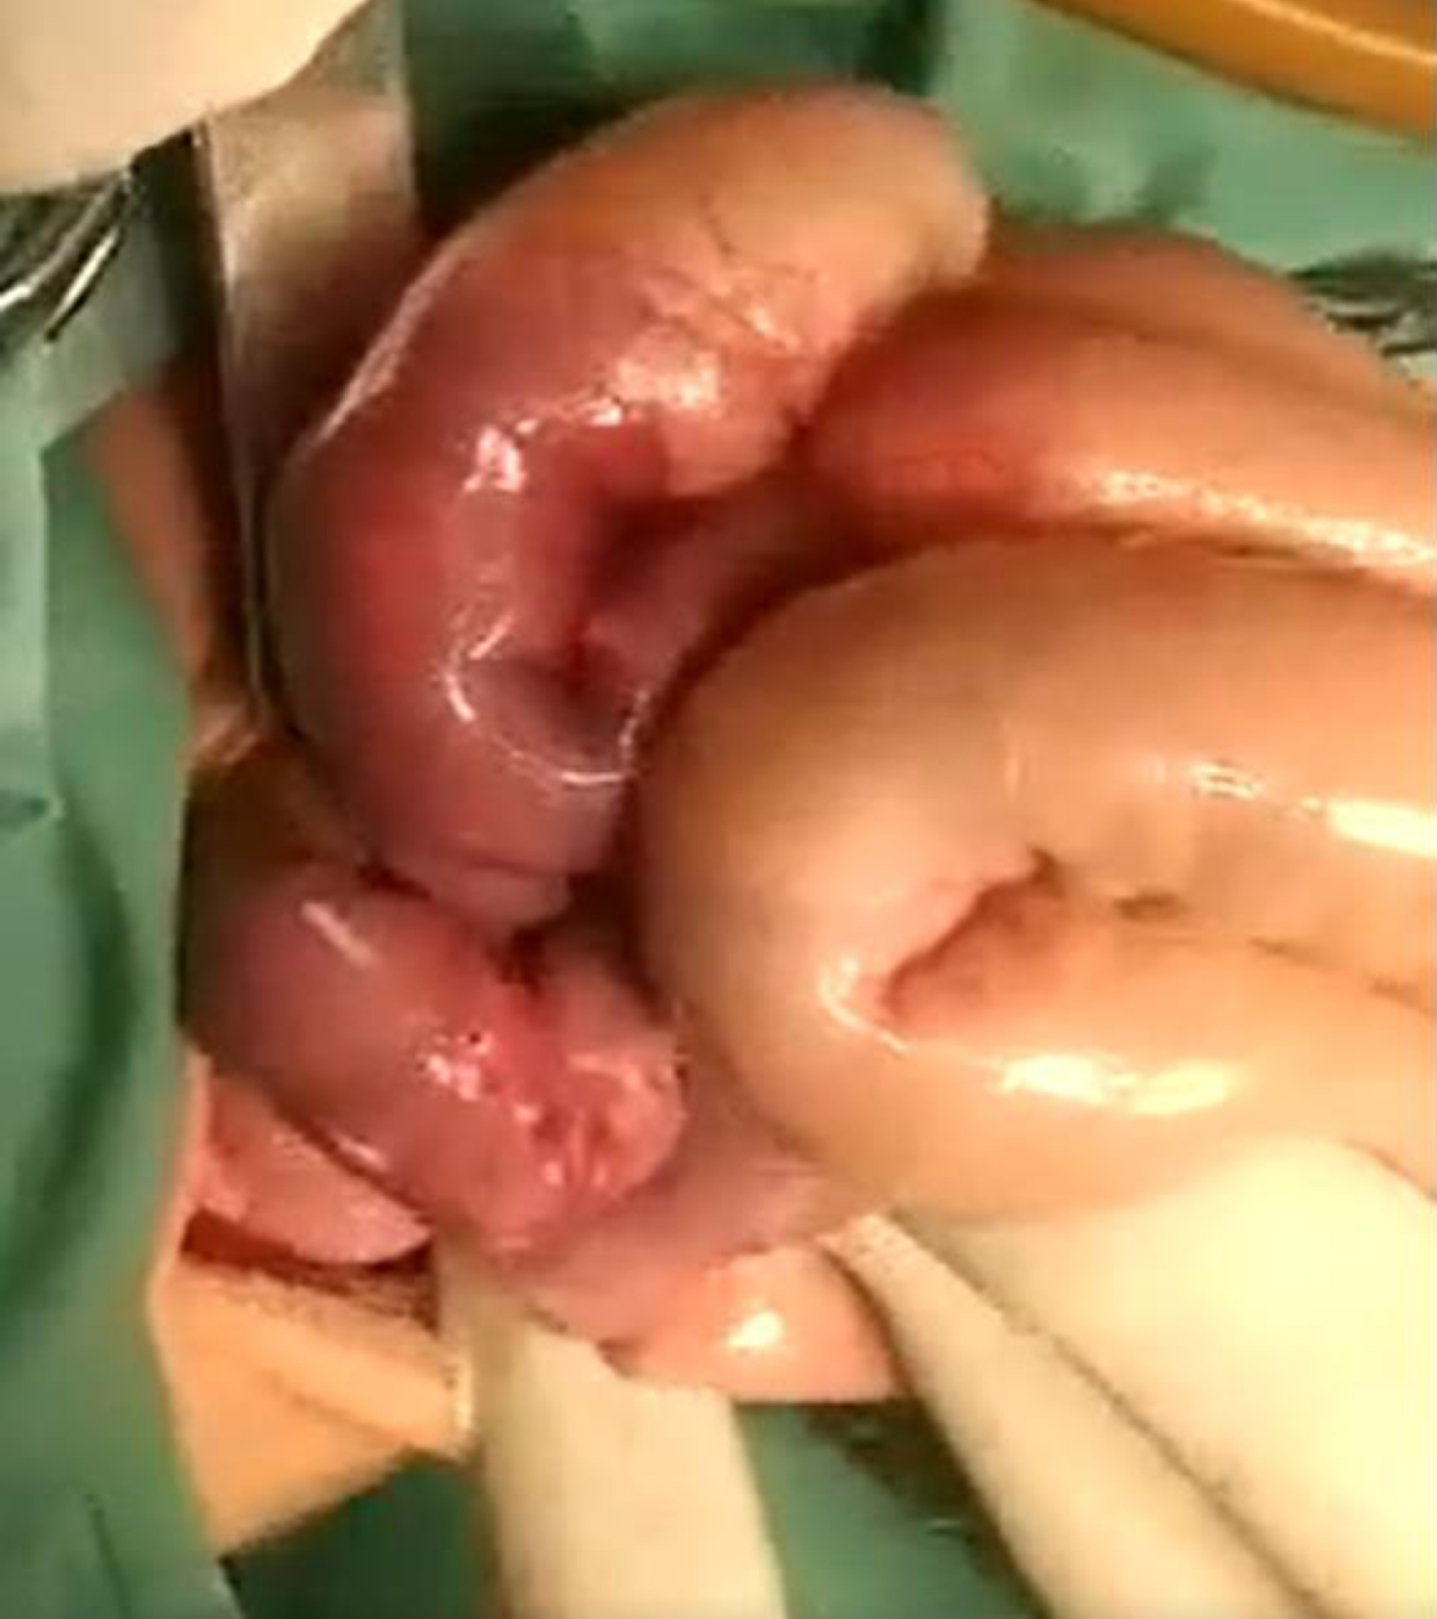 Patient’s intestine on photos during the surgical intervention showing intestinal distension and hyperemia.